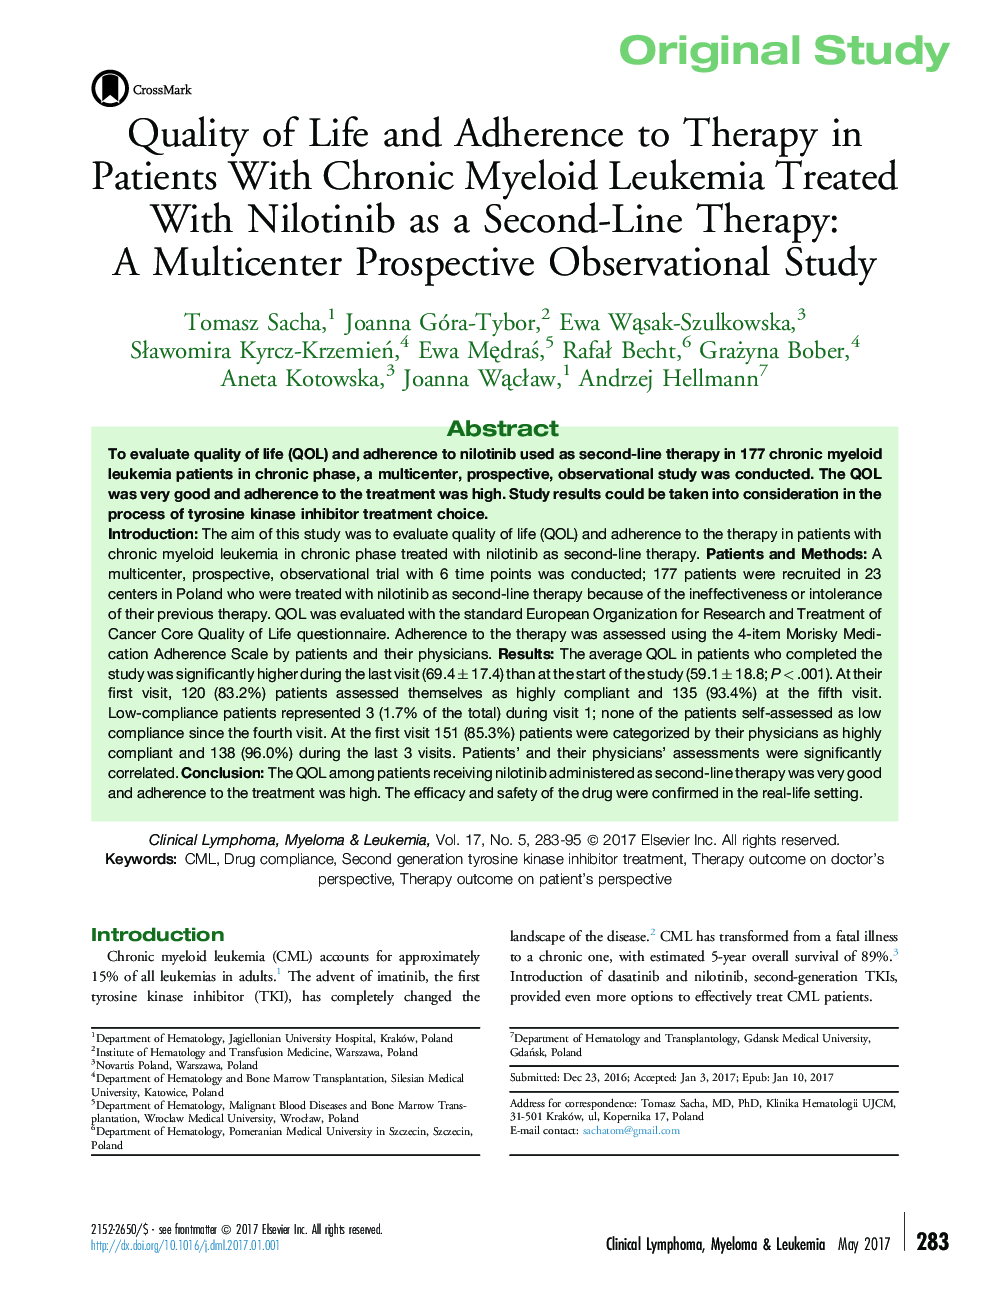 Quality of Life and Adherence to Therapy in Patients With Chronic Myeloid Leukemia Treated With Nilotinib as a Second-Line Therapy: AÂ Multicenter Prospective Observational Study